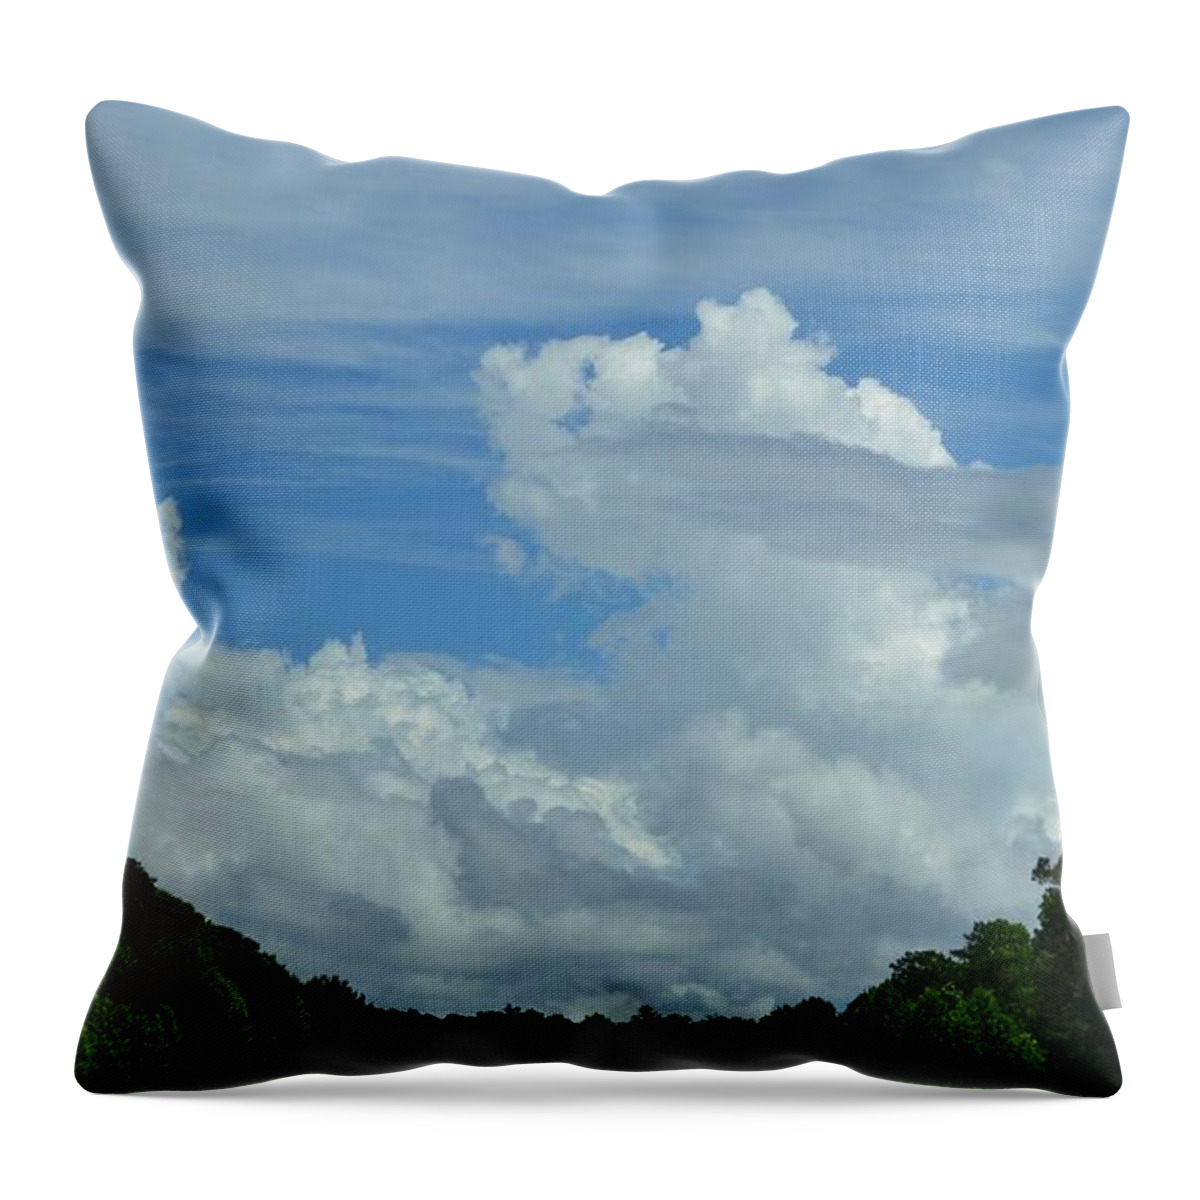 Clouds Throw Pillow featuring the photograph Natural Clouds by Eileen Brymer